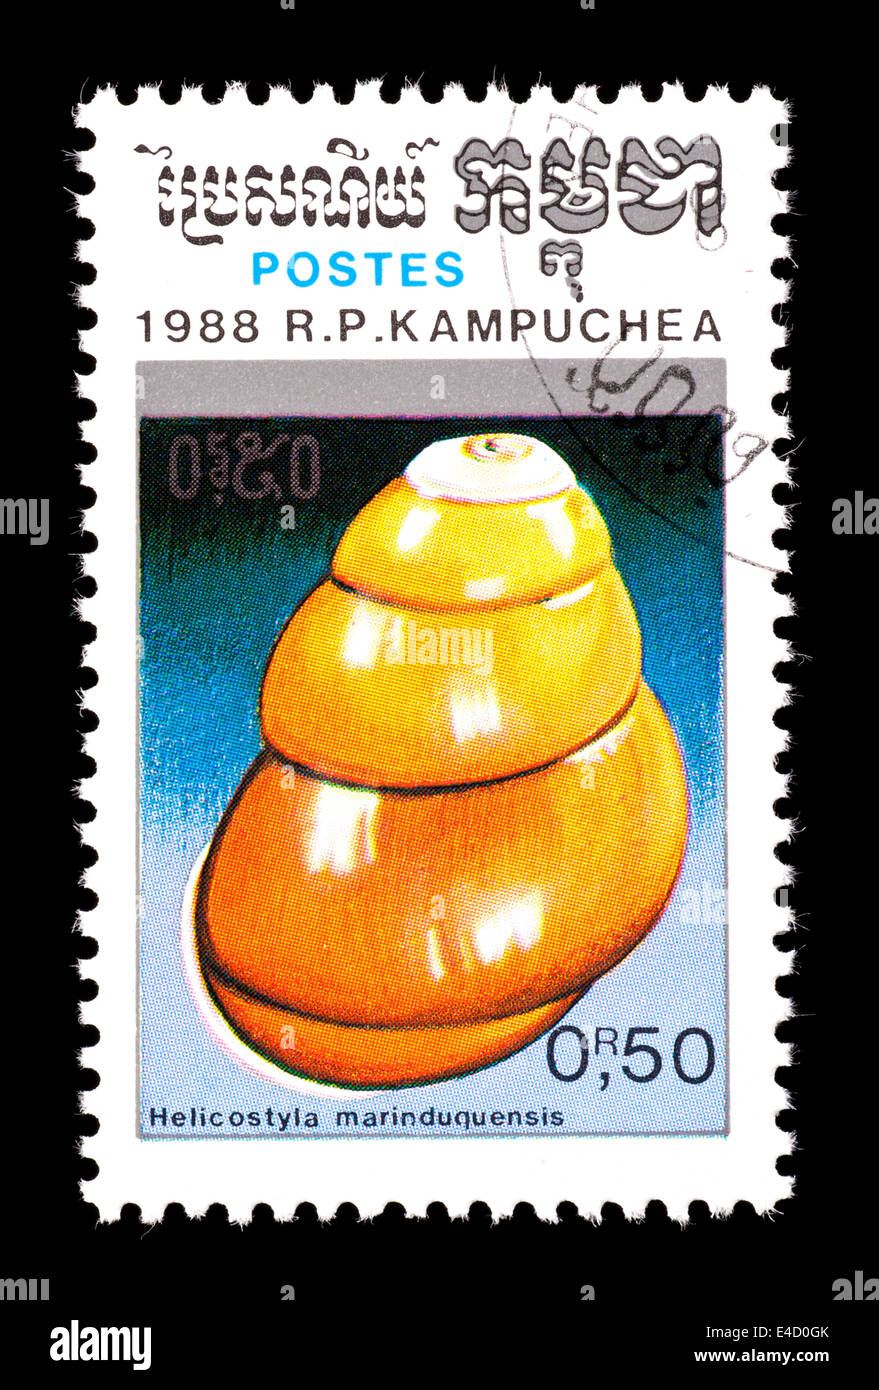 Postage stamp from Cambodia (Kampuchea) depicting a small land snail shell (Helicostyla marinduquensis) Stock Photo